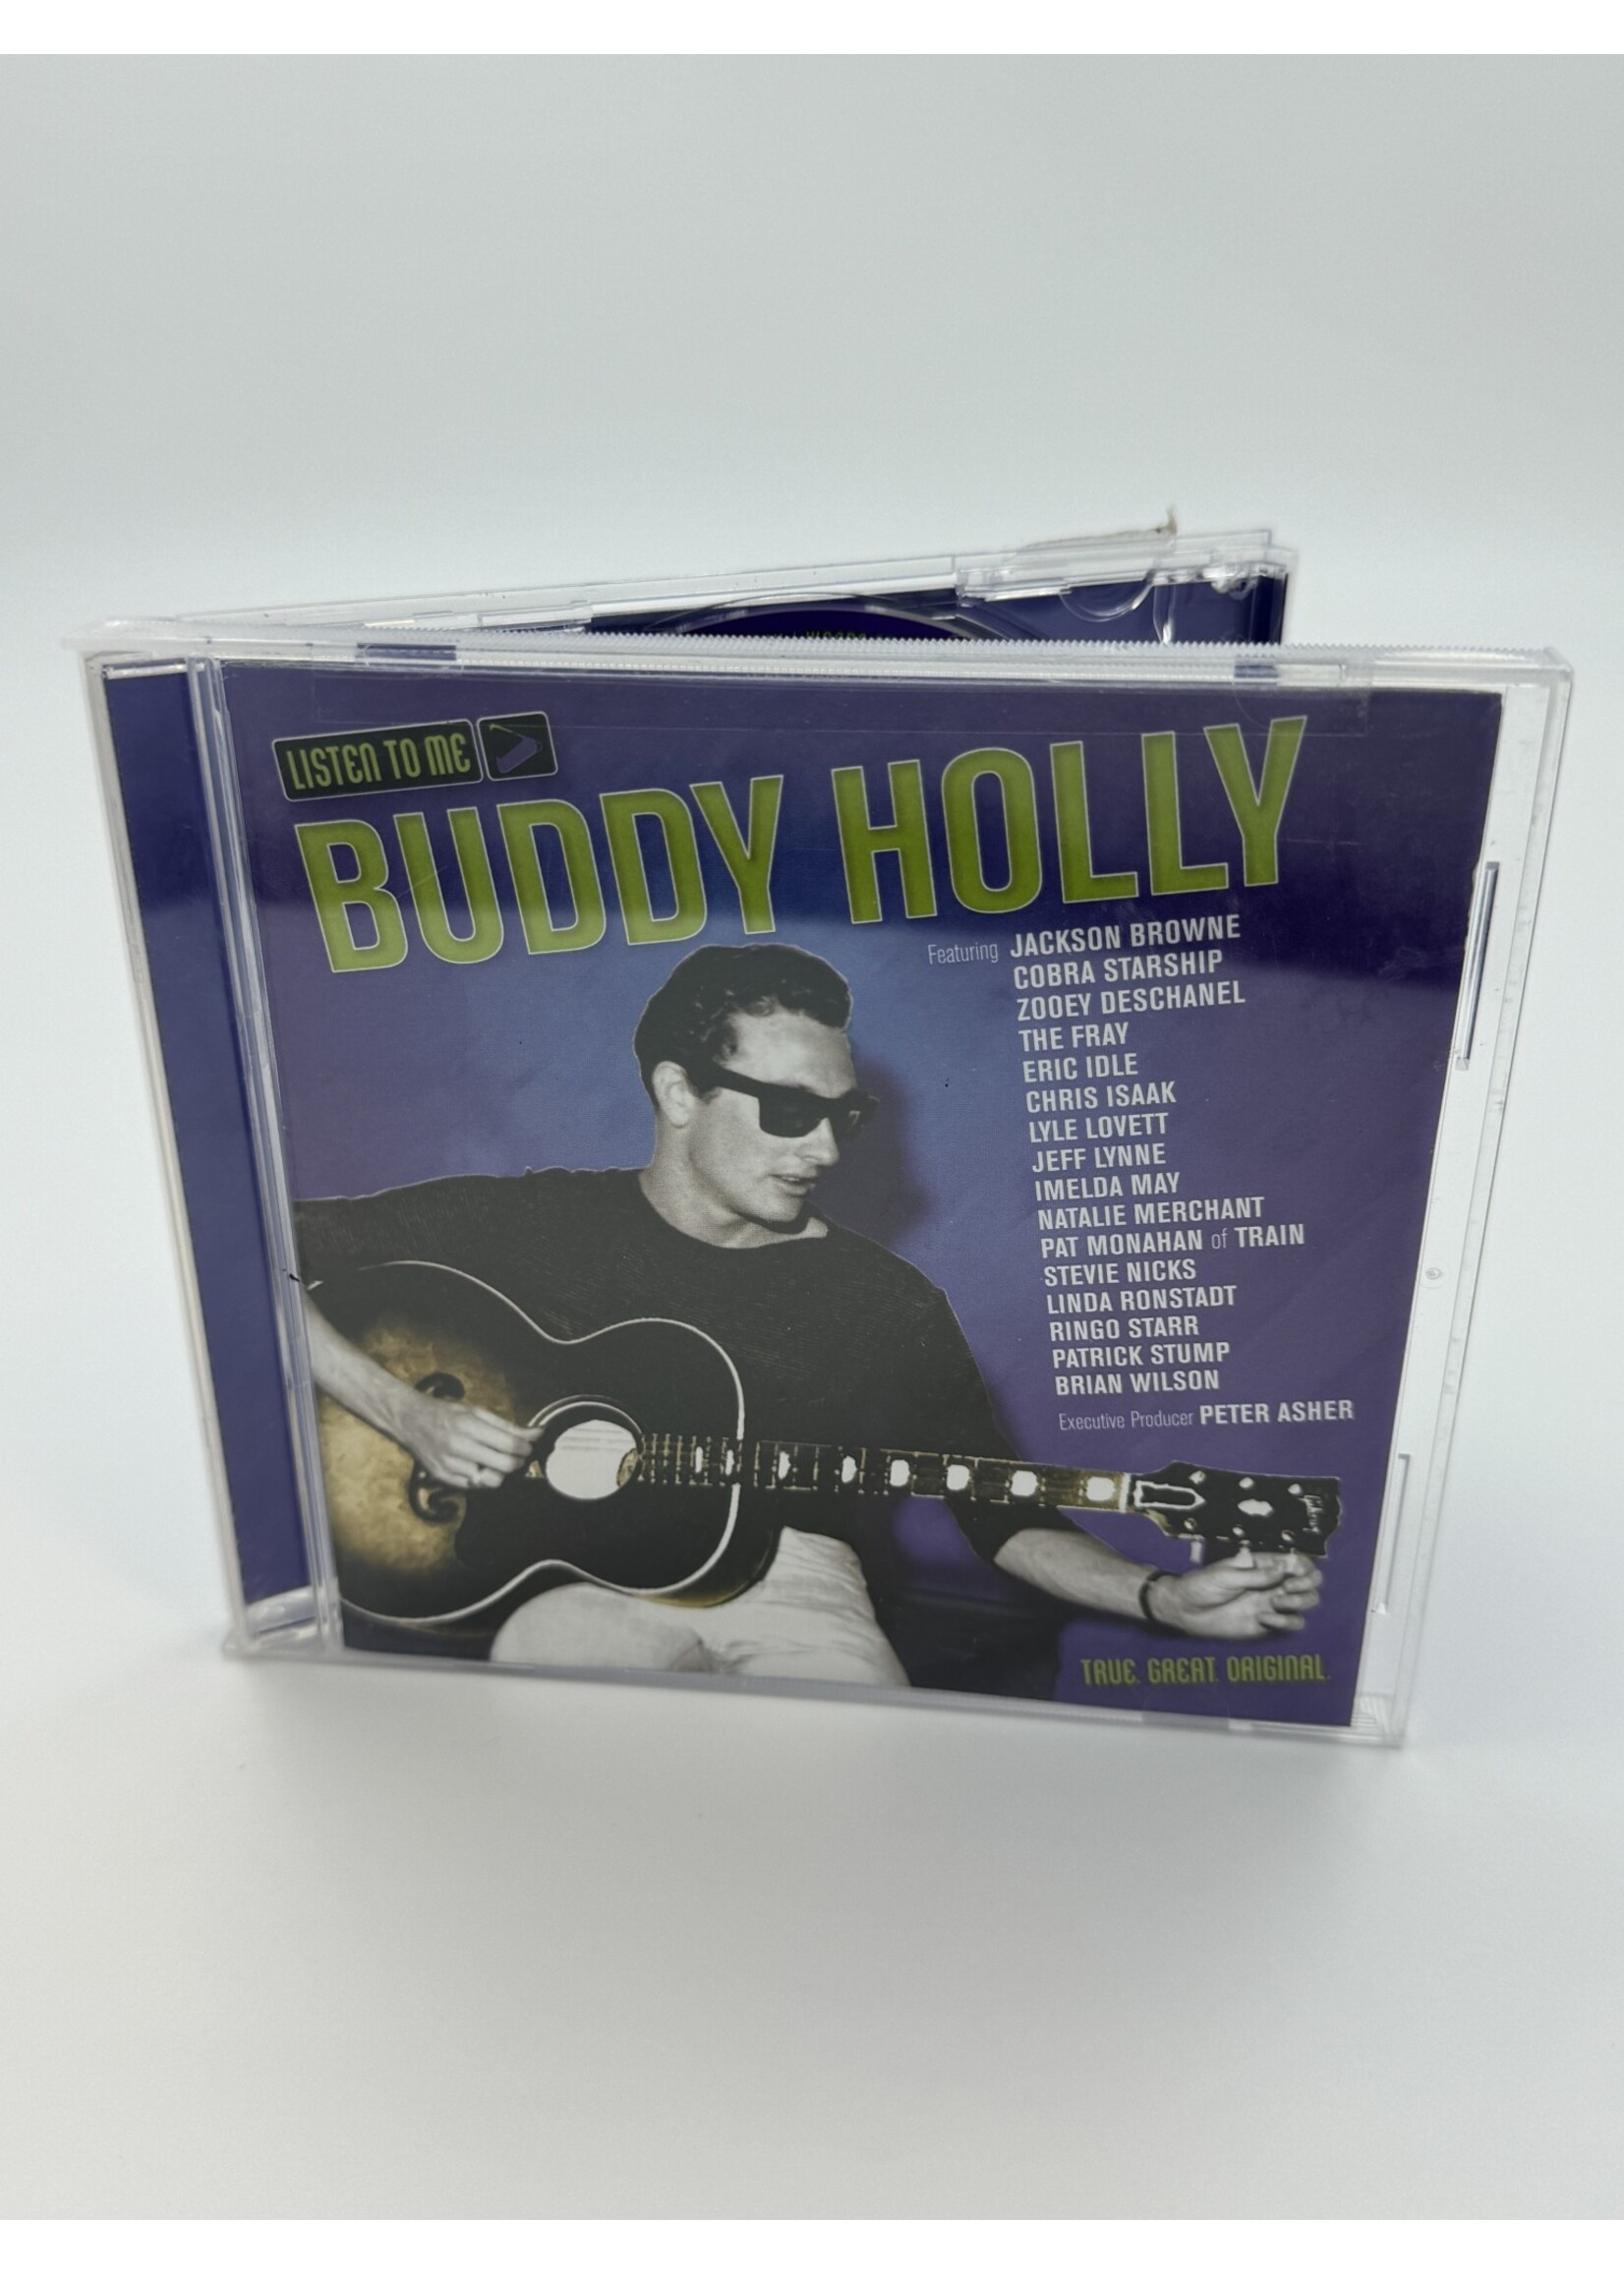 CD Buddy Holly Listen To Me CD